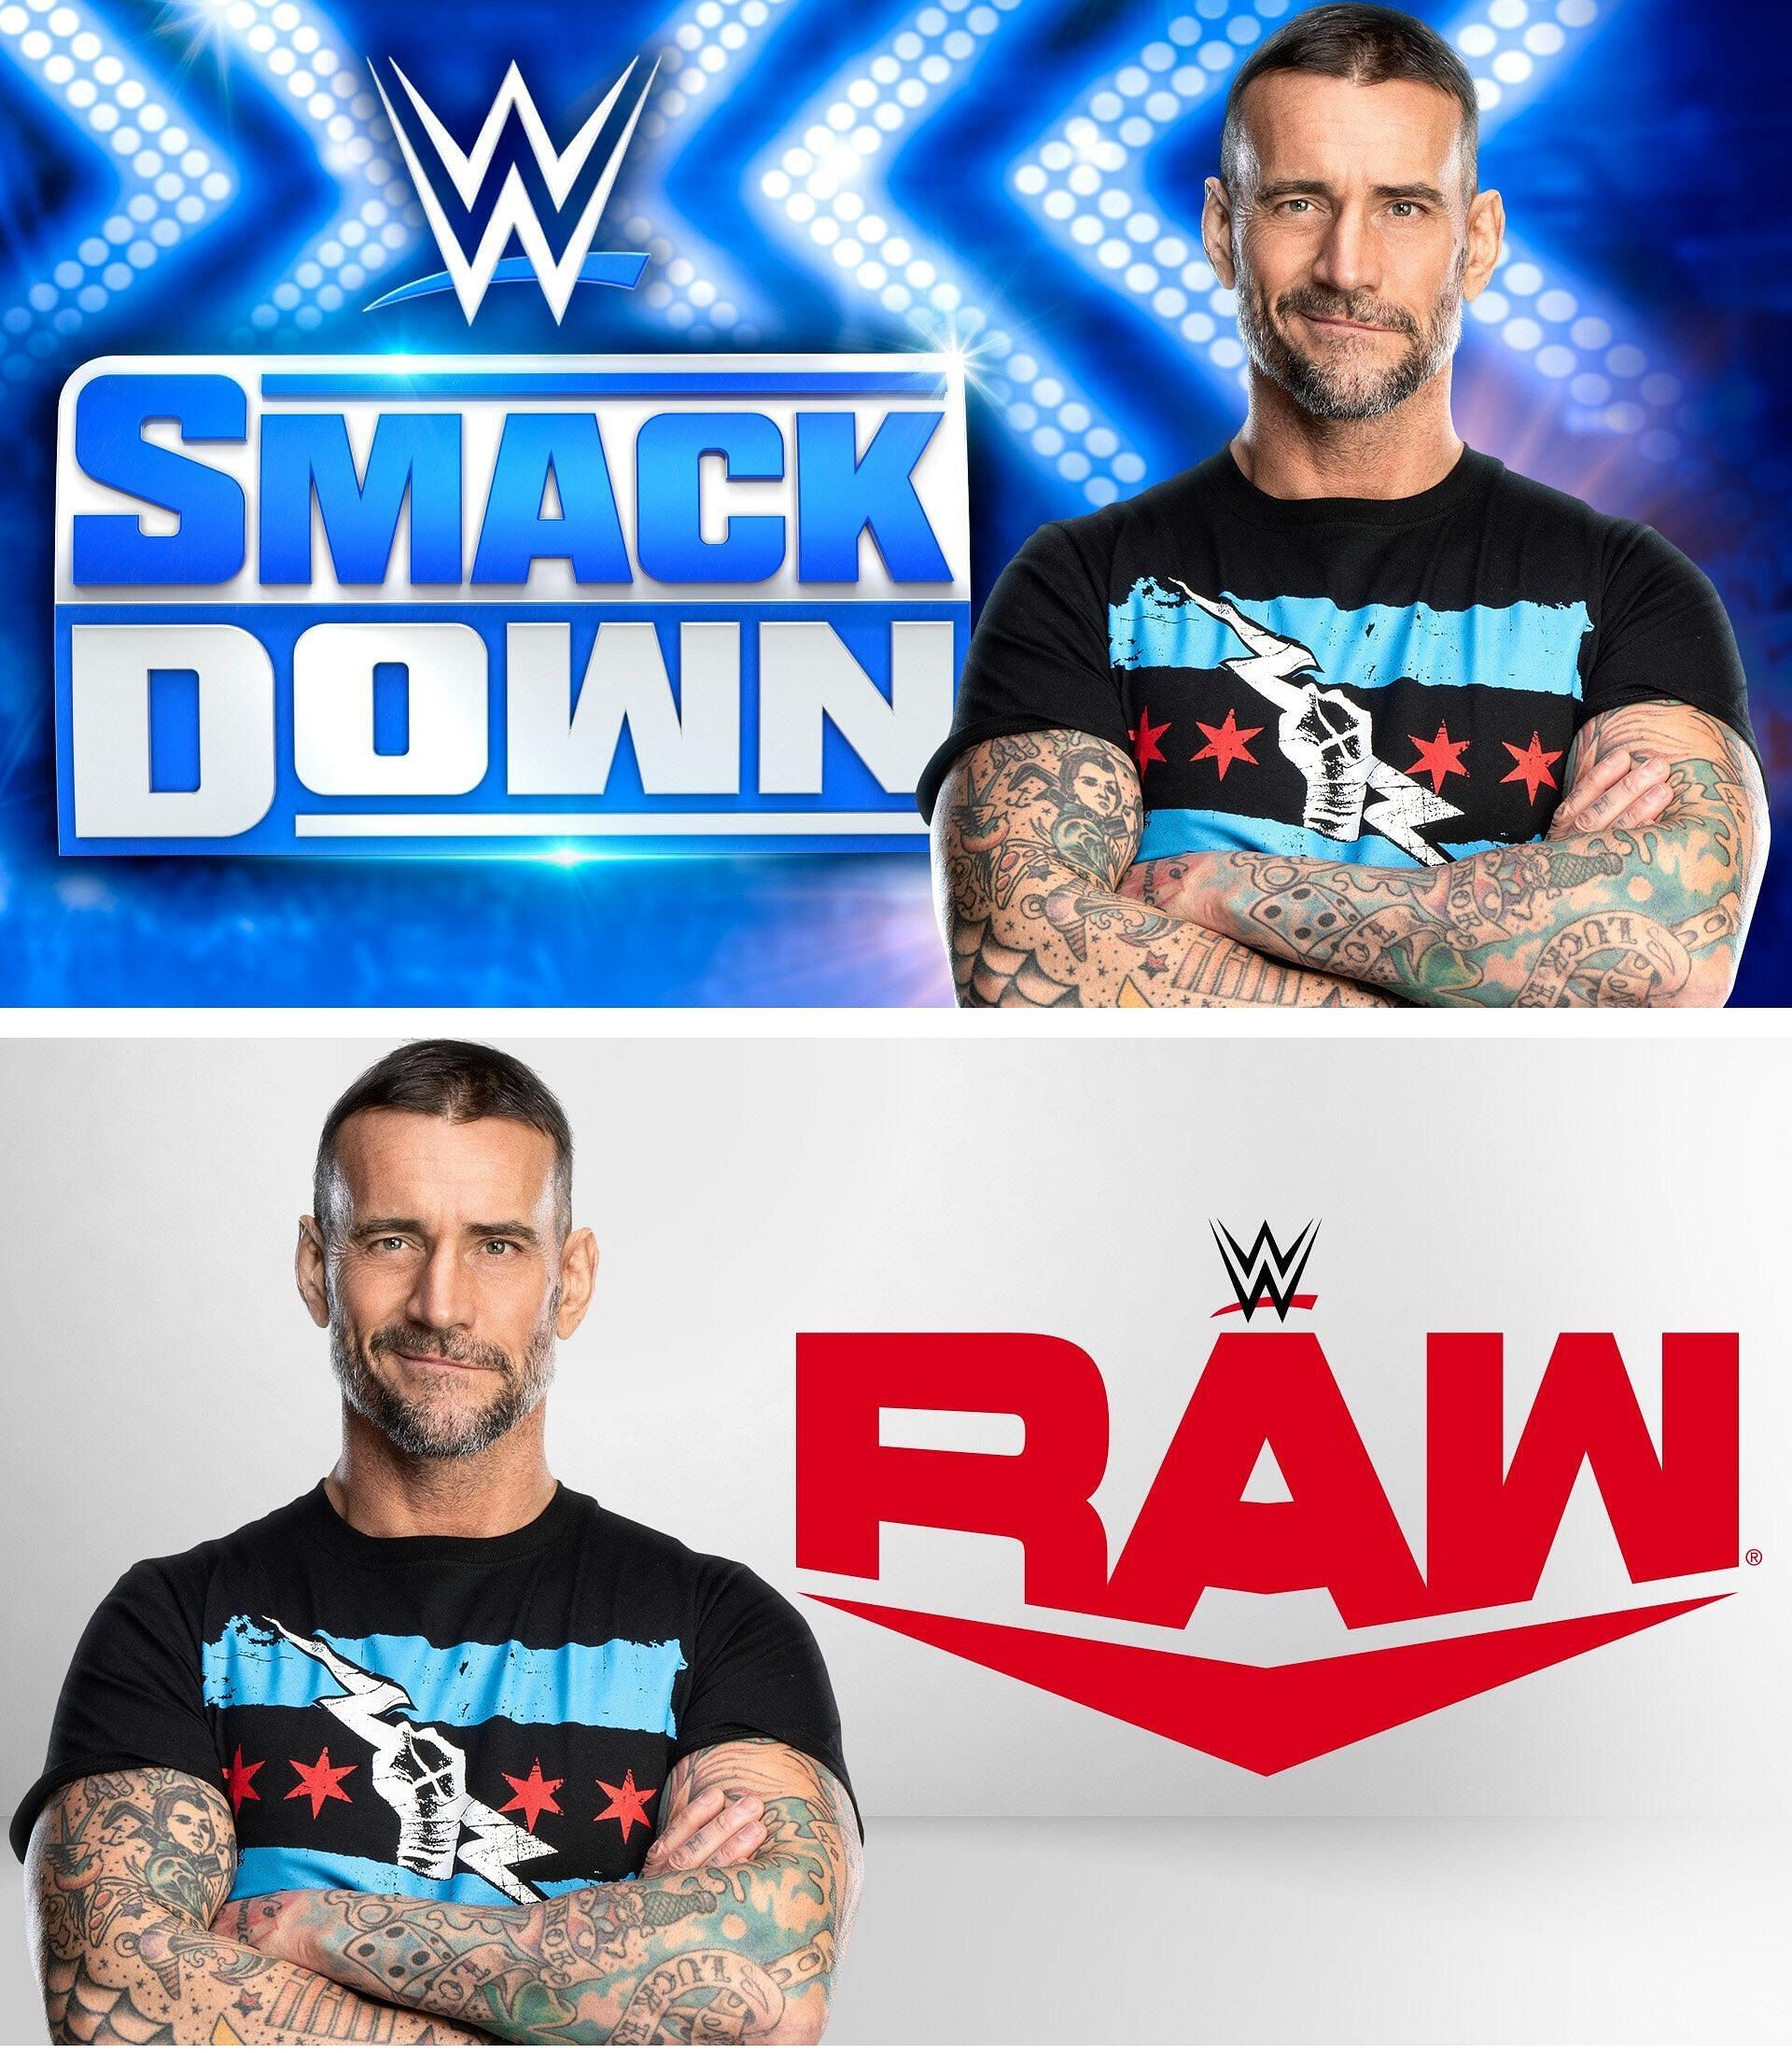 CM Punk on promotional graphics for RAW and SmackDown shows with the WWE Draft